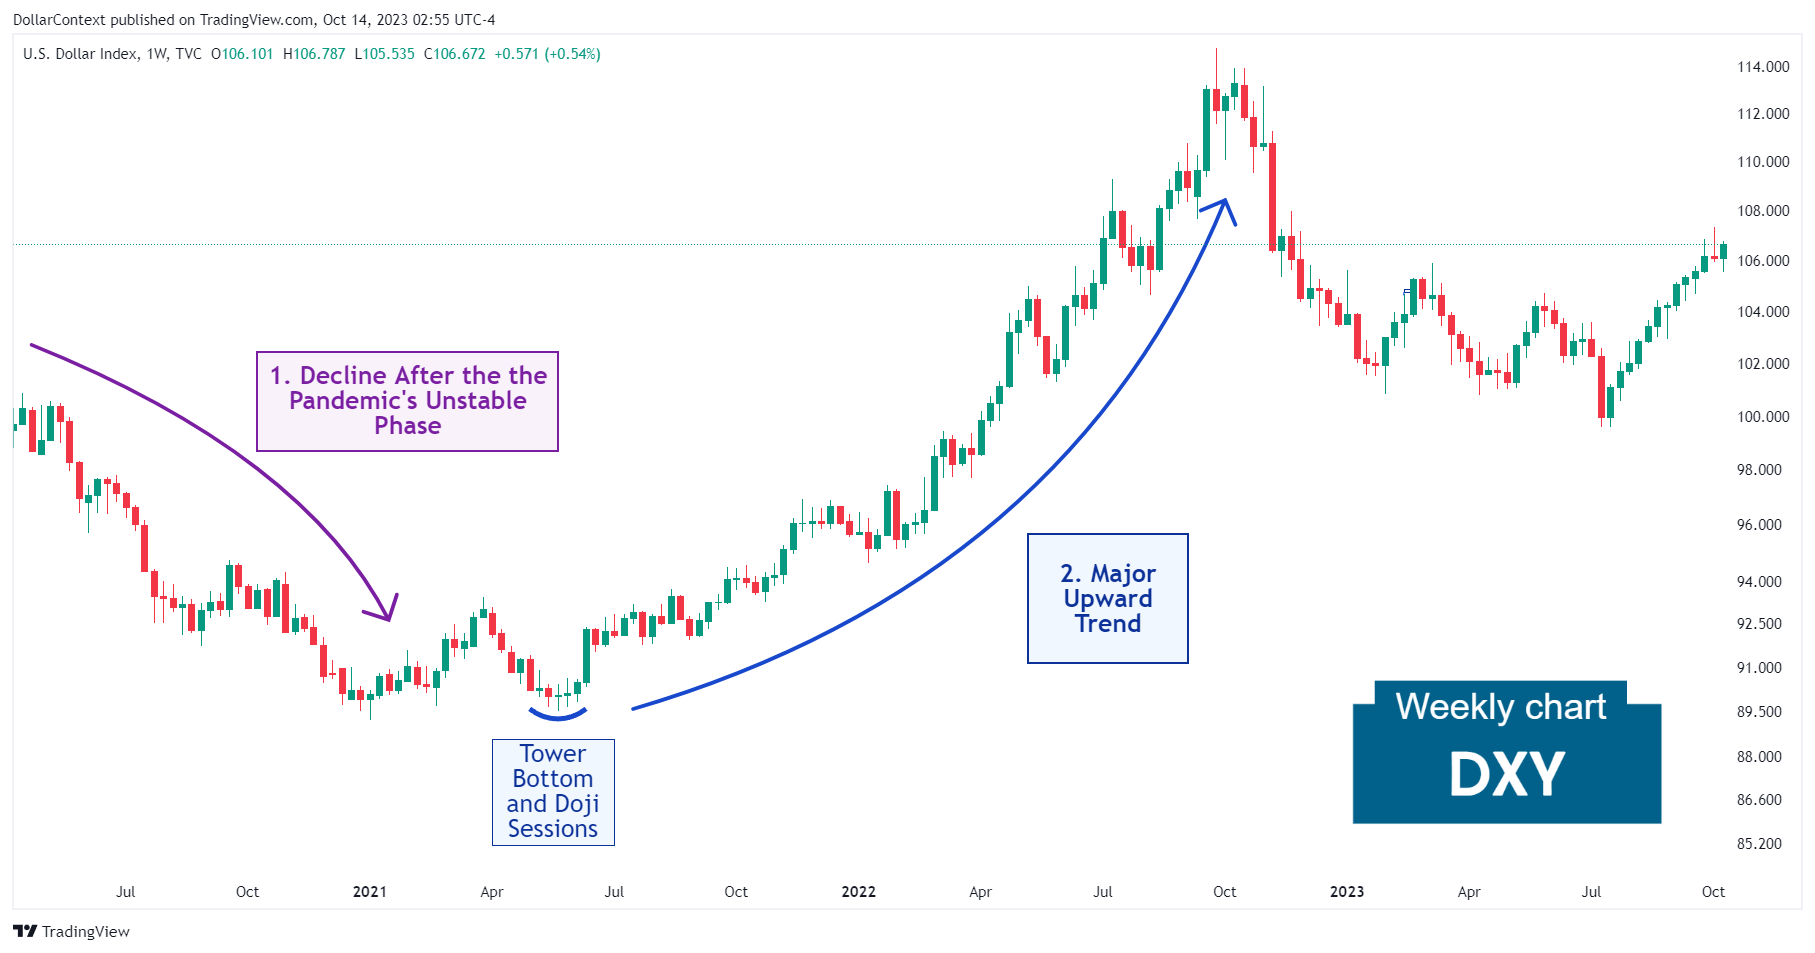 U.S. Dollar Index (DXY): The Uptrend from June 2021 to September 2022 (Weekly Chart)